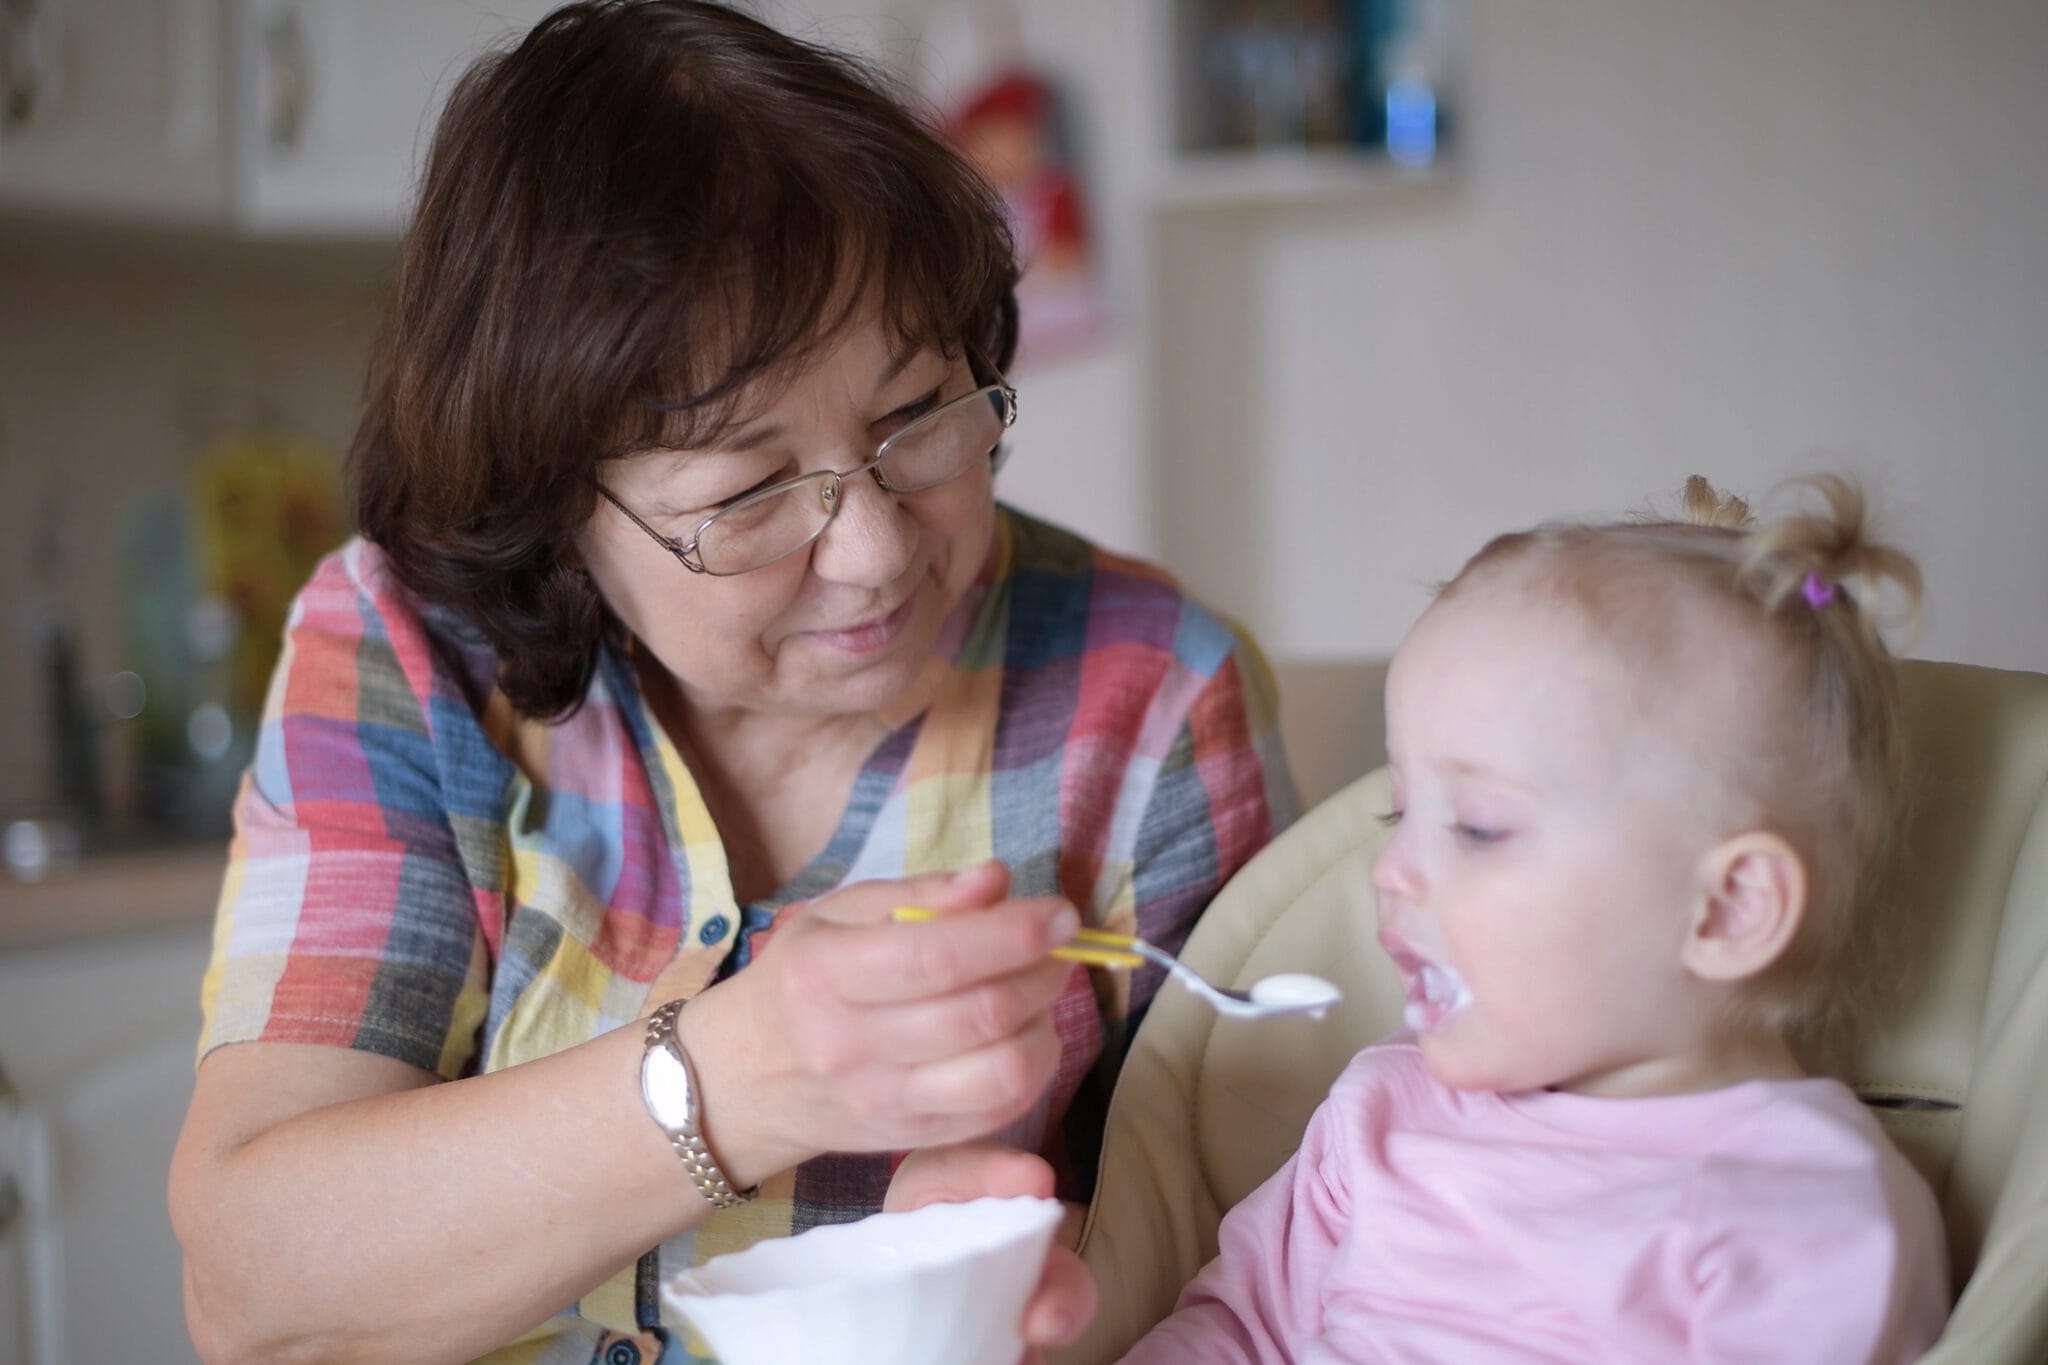 A woman in her 60s feeds a baby in a high chair.